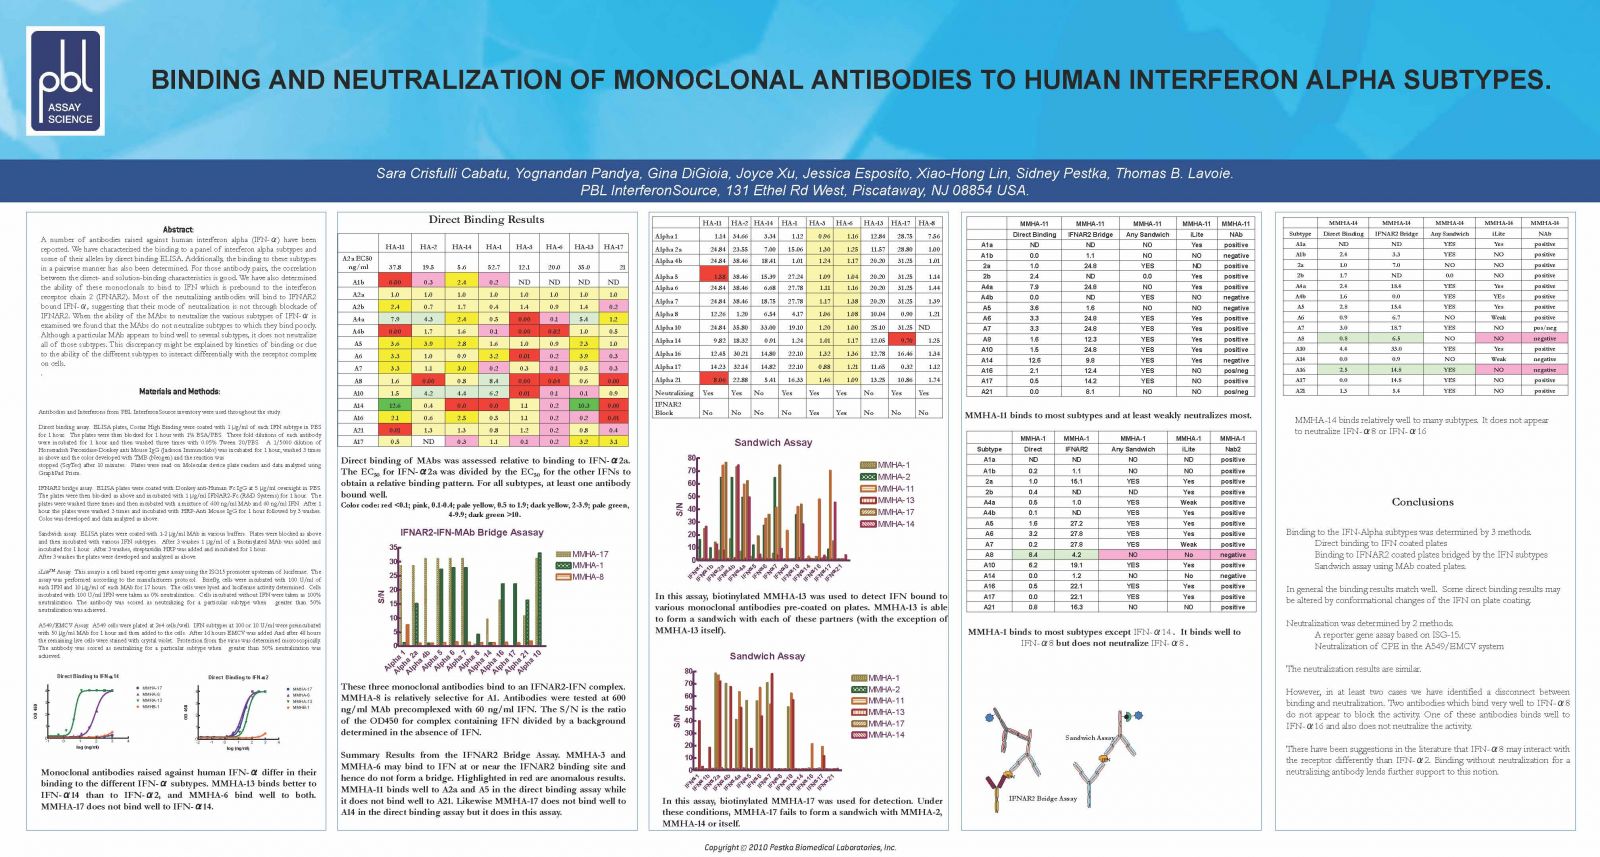 Binding and Neutralization of MAbs to Human IFN-Alpha Subtypes